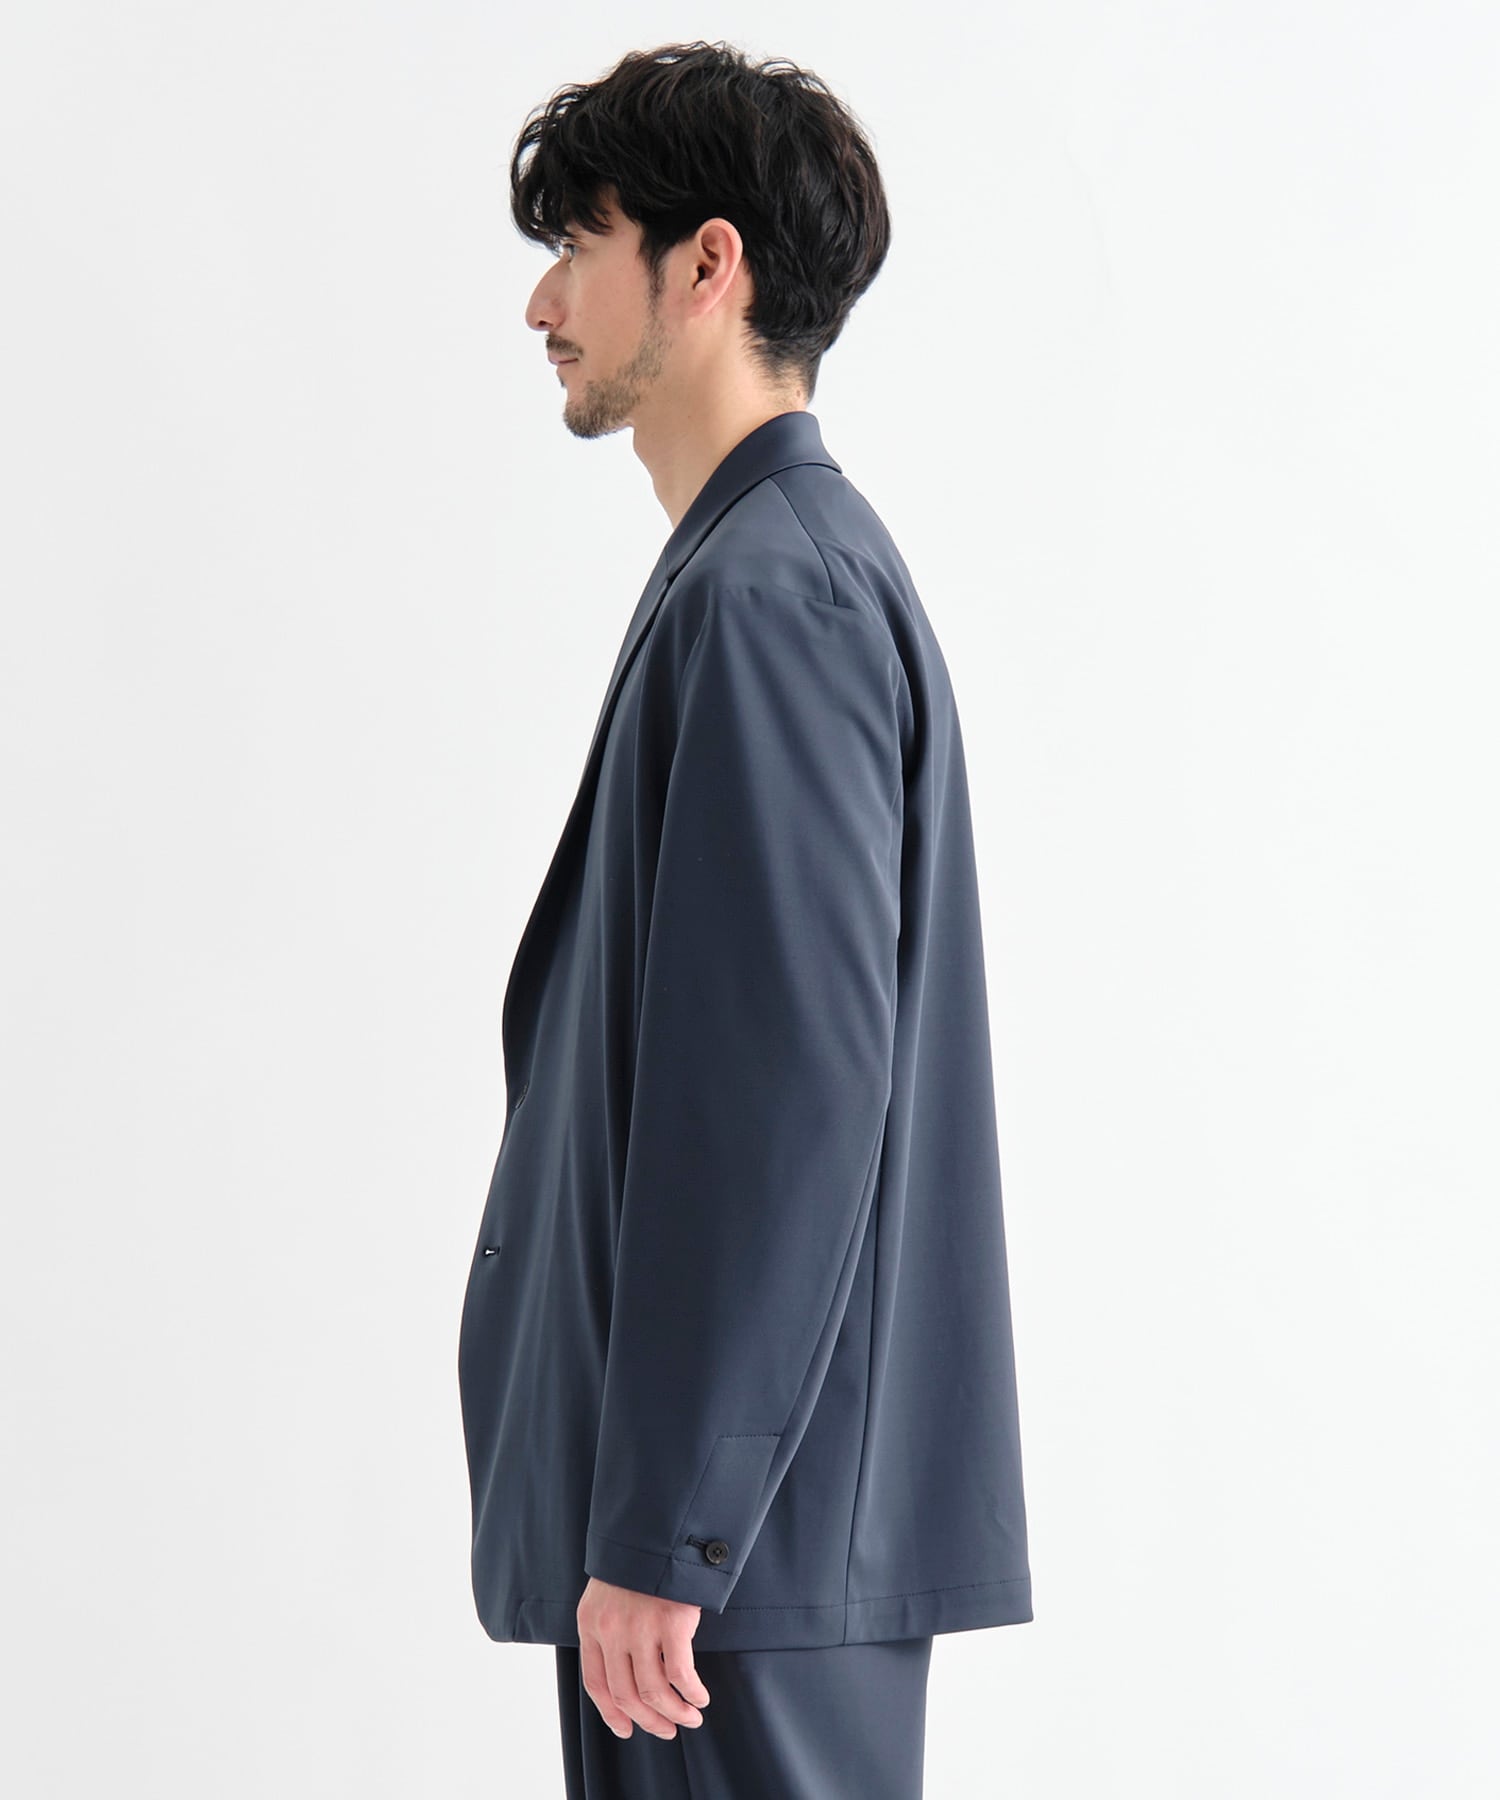 Washable High Function Jersey Box Jacket THE TOKYO